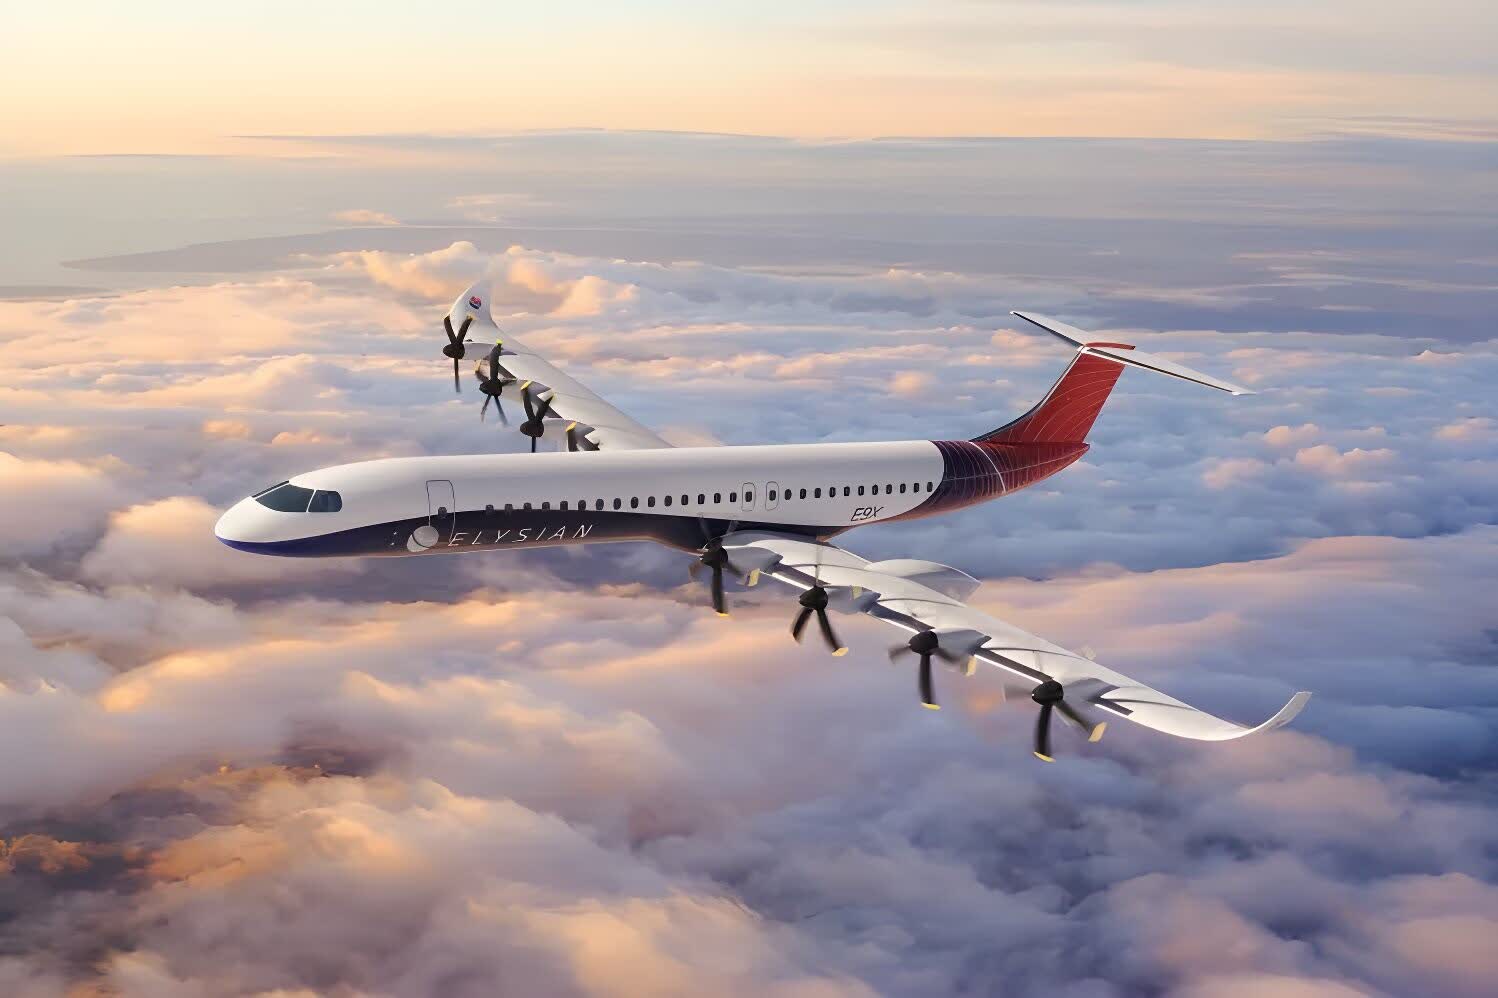 Dutch company reveals plans for 90-passenger electric aircraft able to travel 500 miles